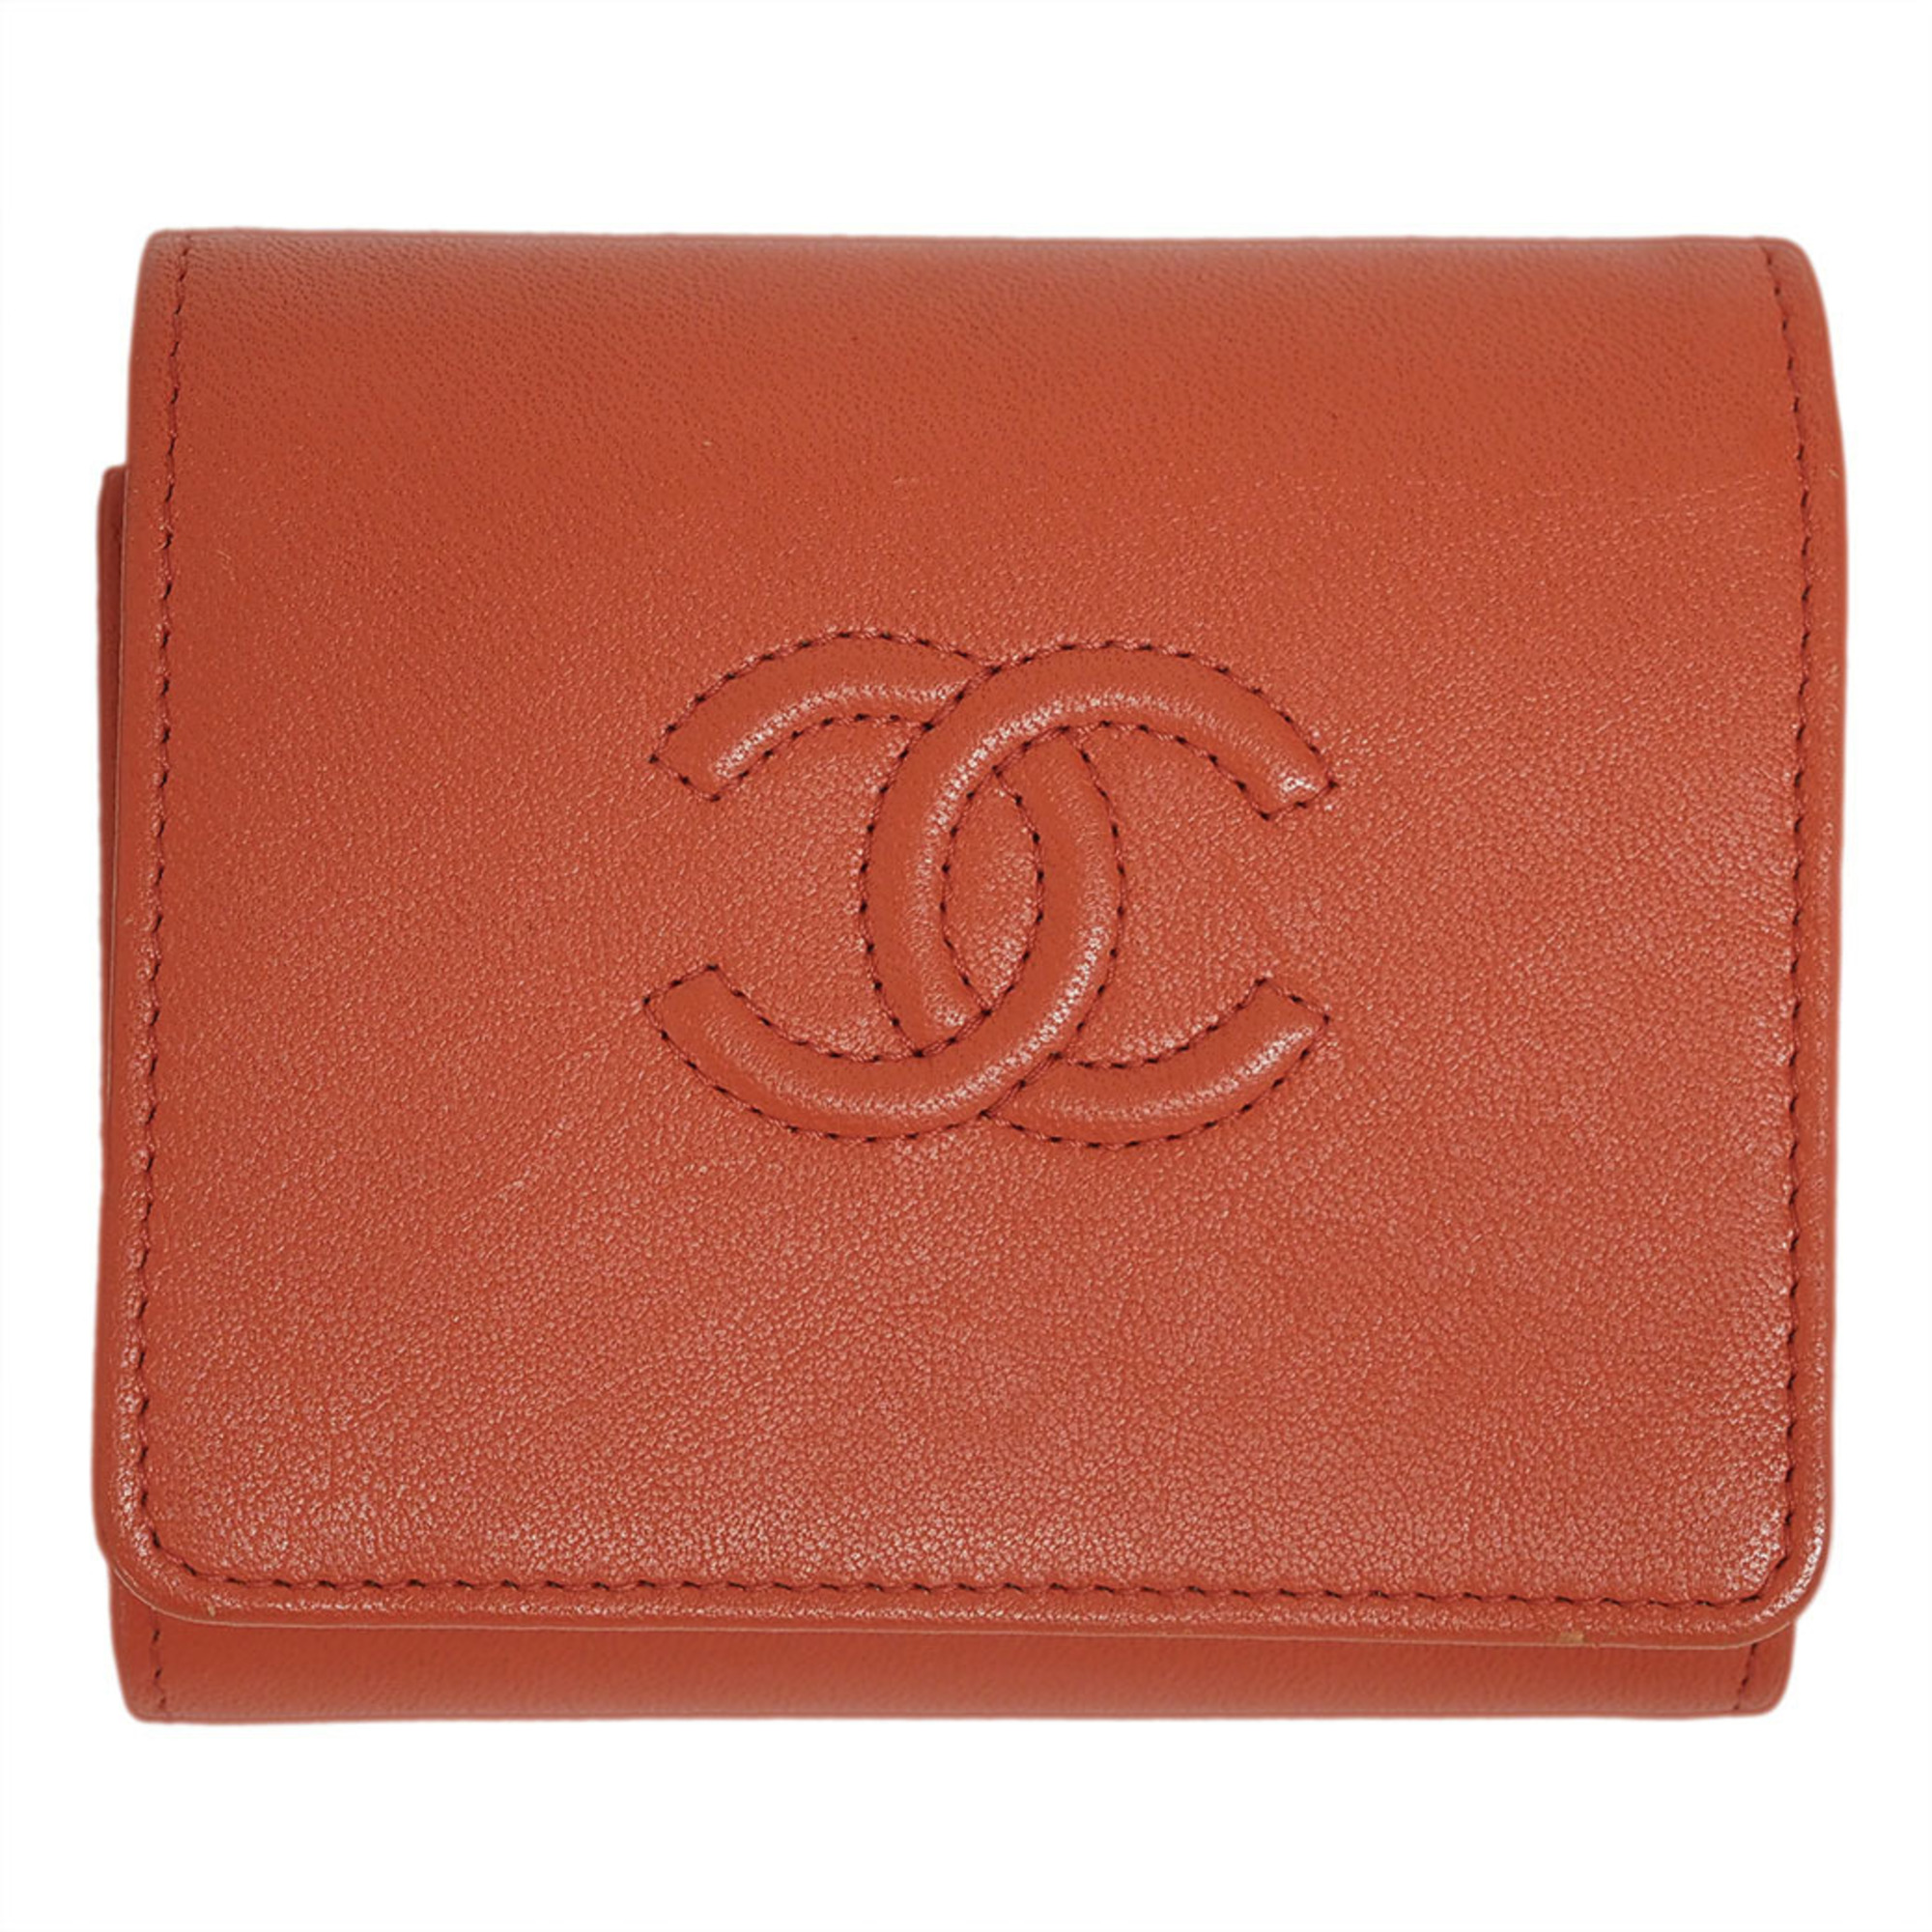 CHANEL Cocomark Trifold Wallet A70796 Coral Pink Orange 28th Series Women's